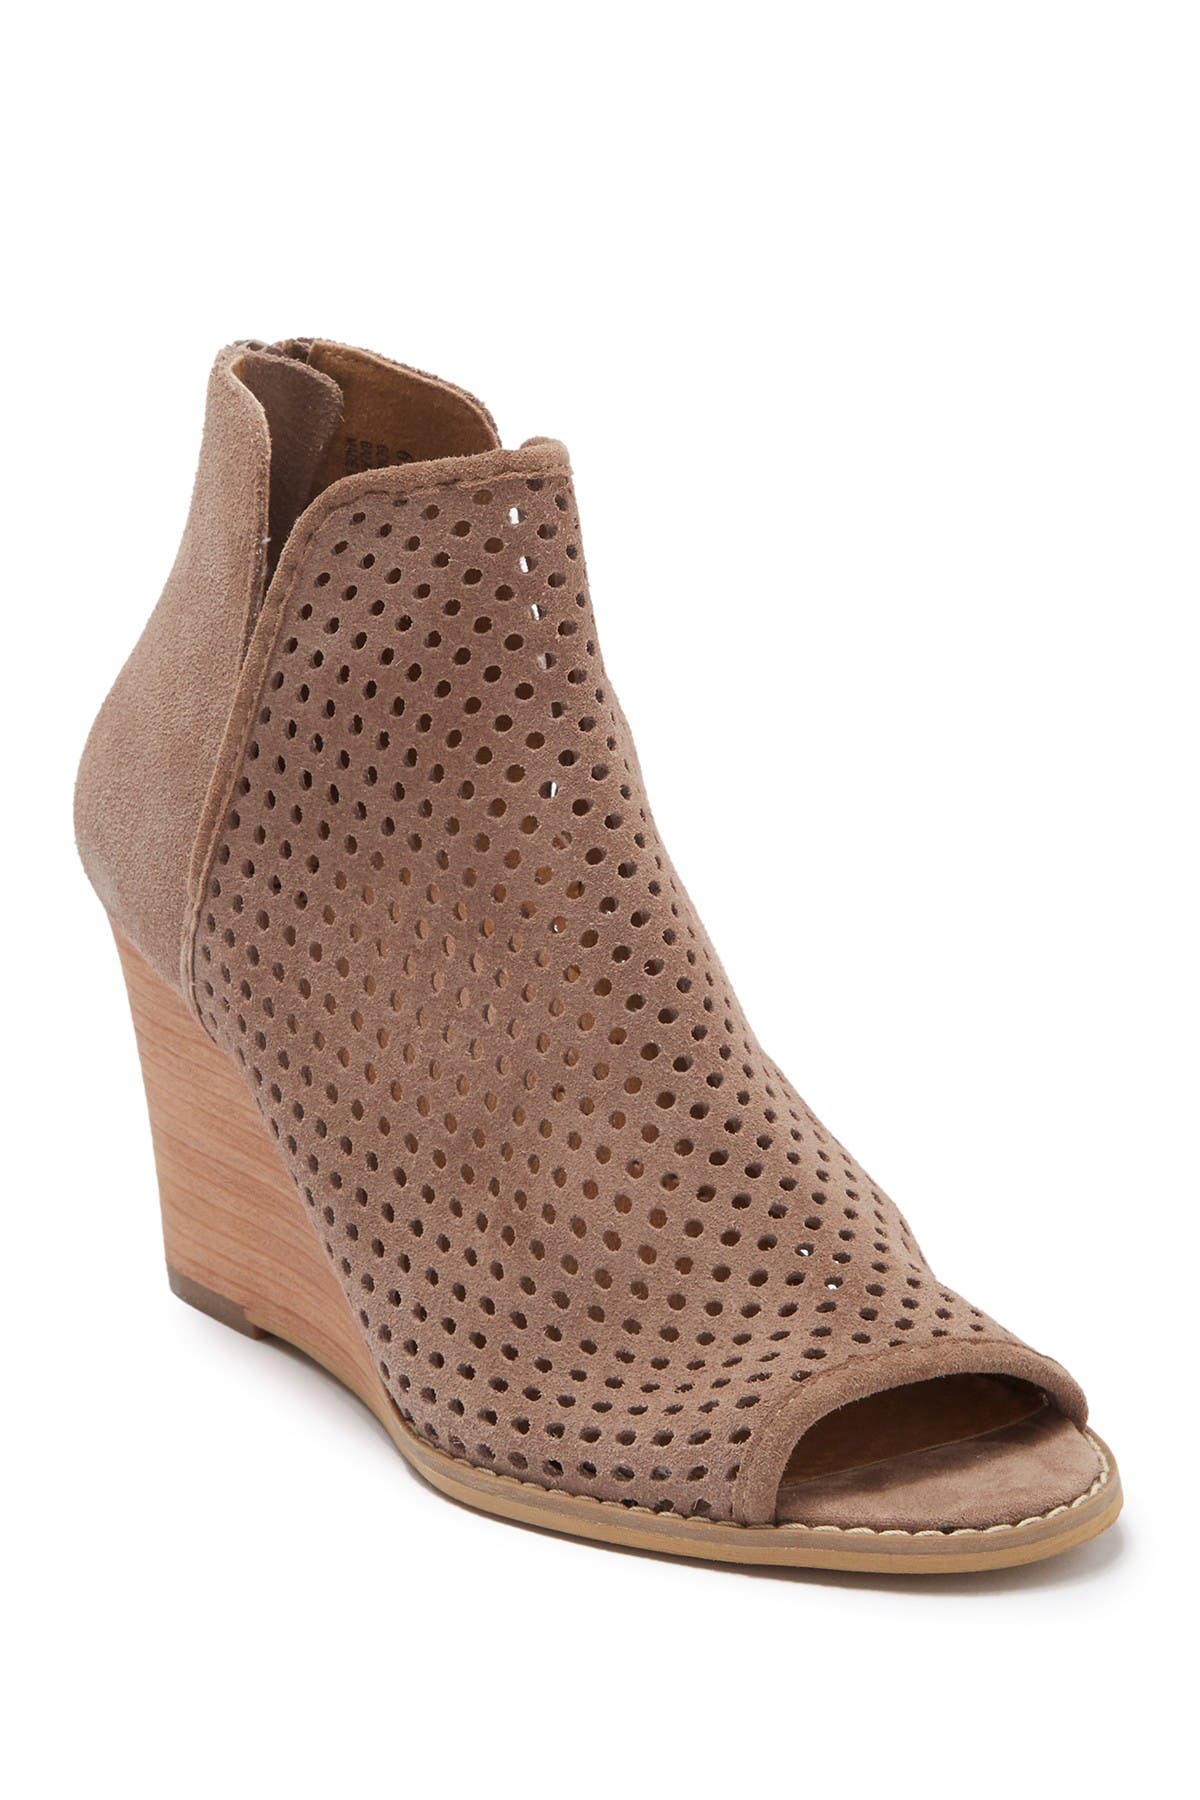 perforated wedge booties